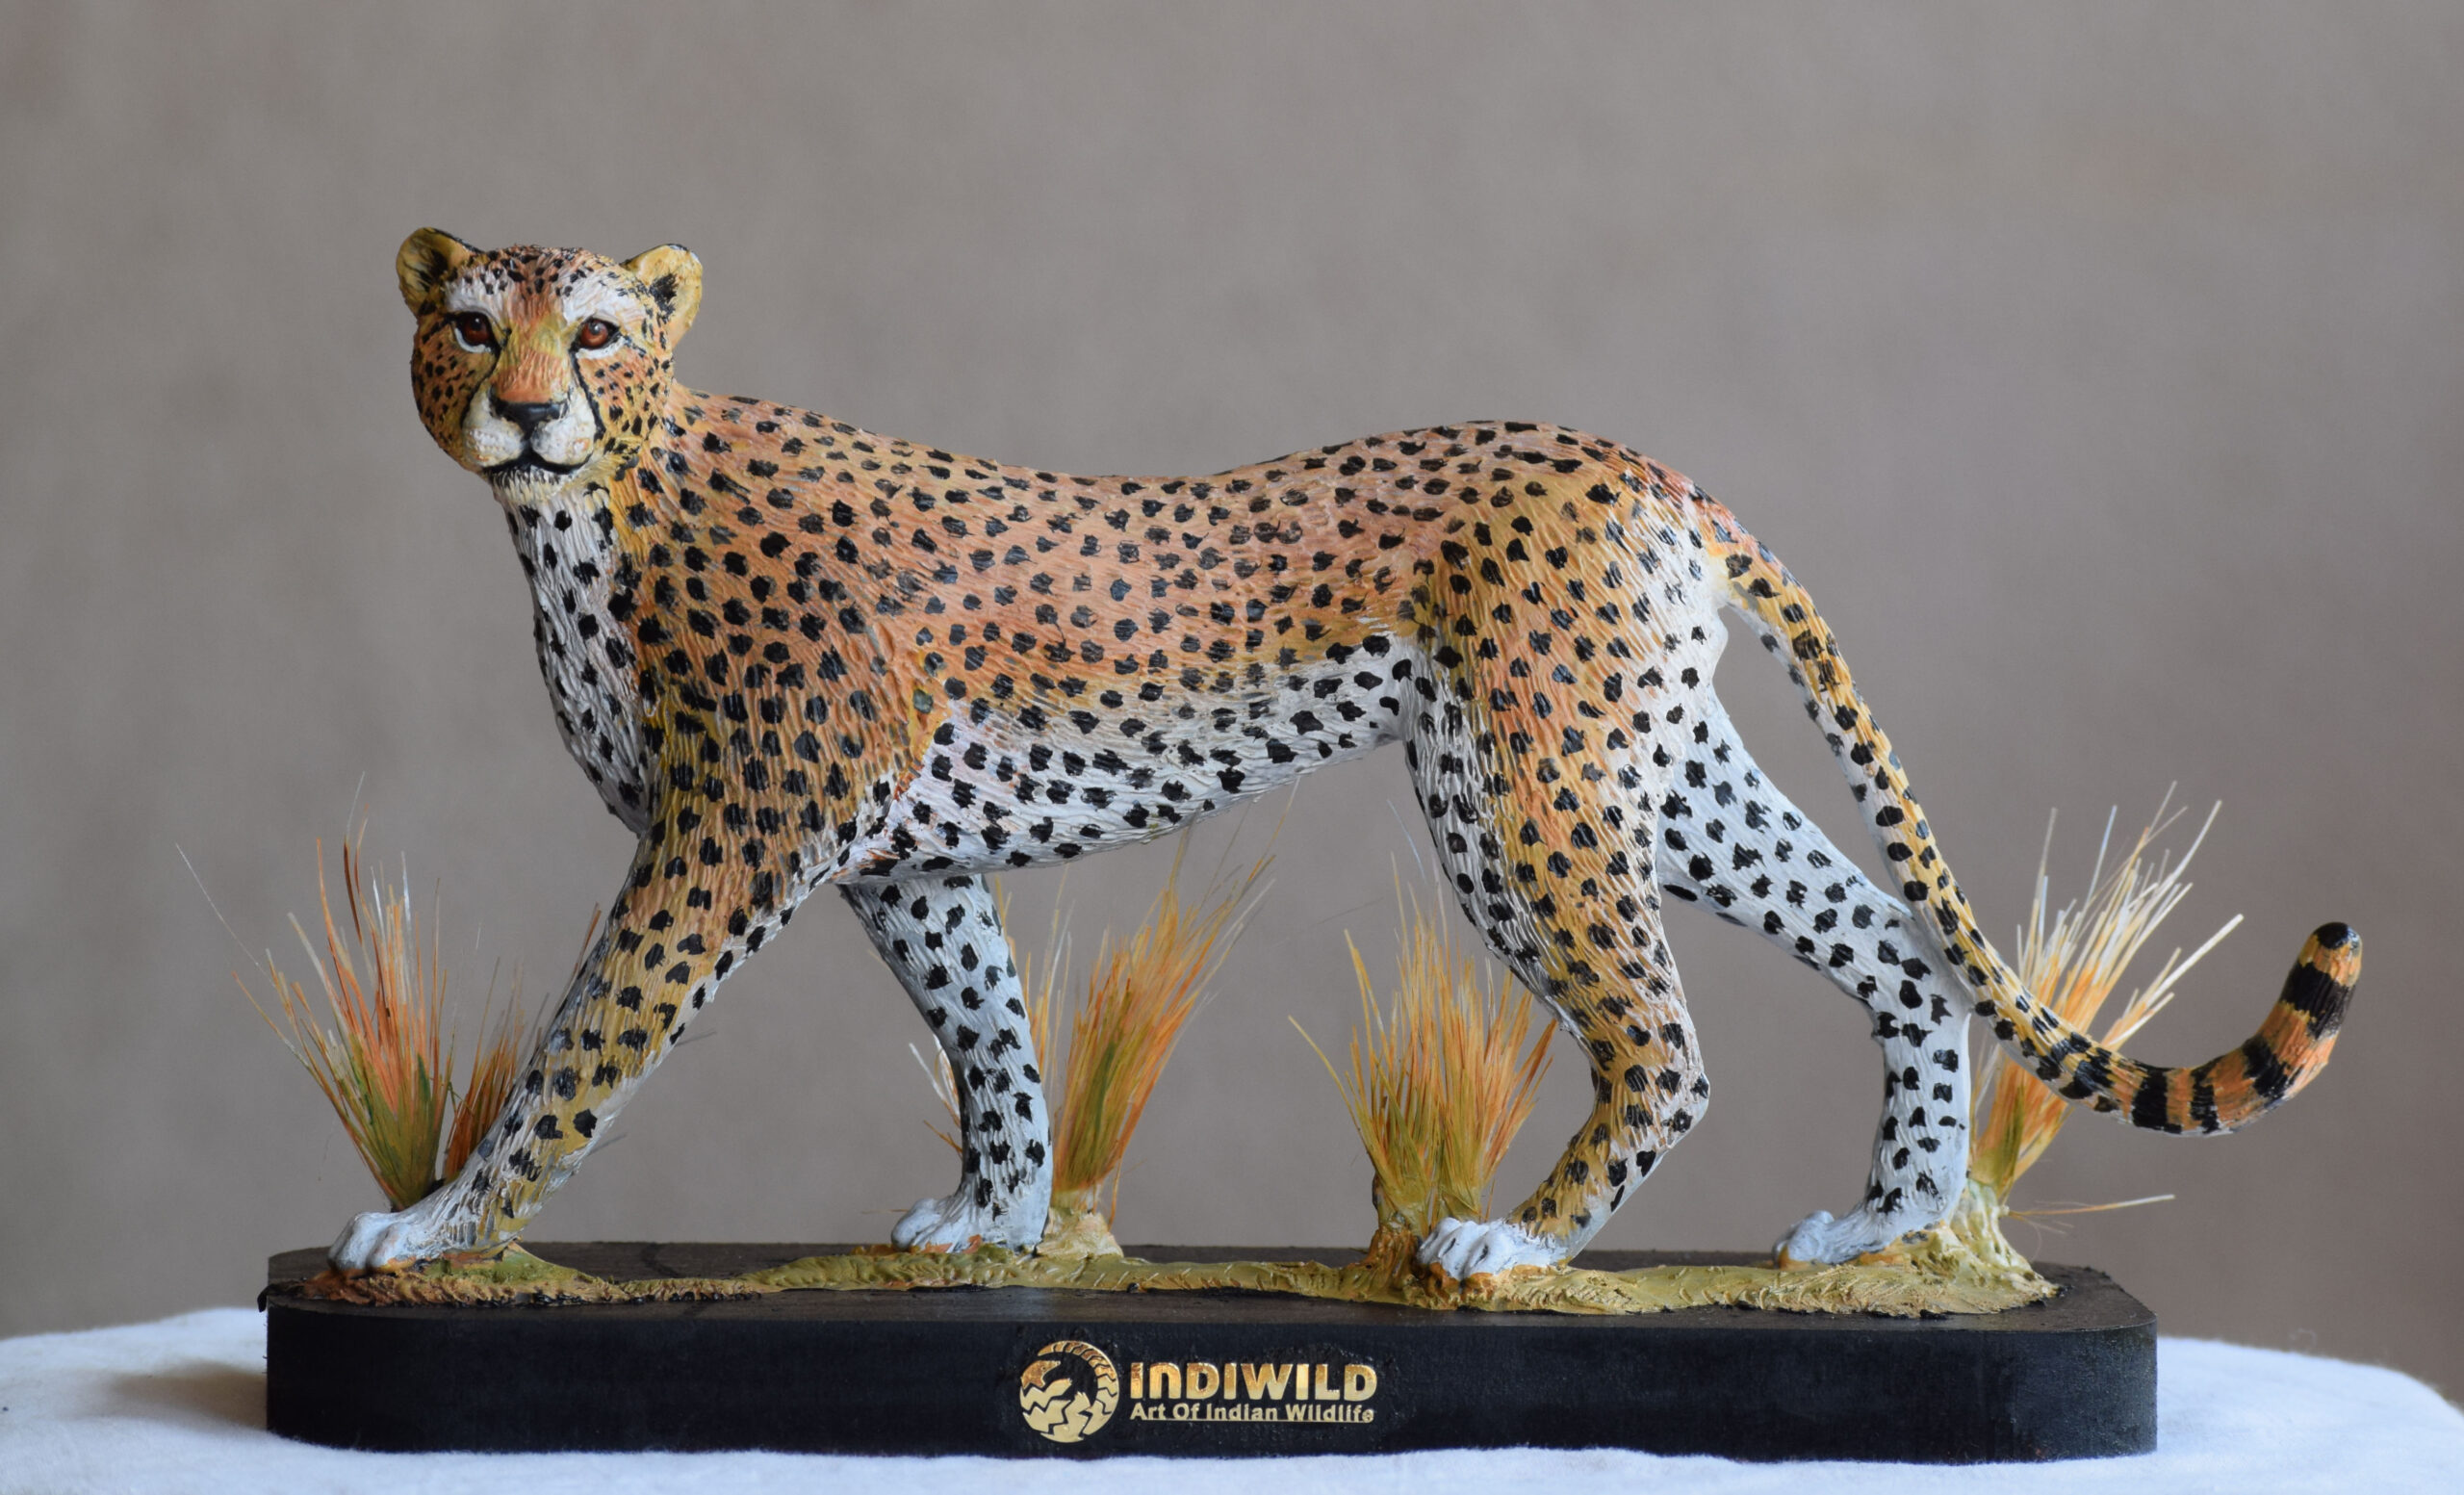 Cheetah sculpture/model by Indiwild, 1 of the best Sculpture - Wildlifekart  is an online shop for Wildlife and Nature Lovers.